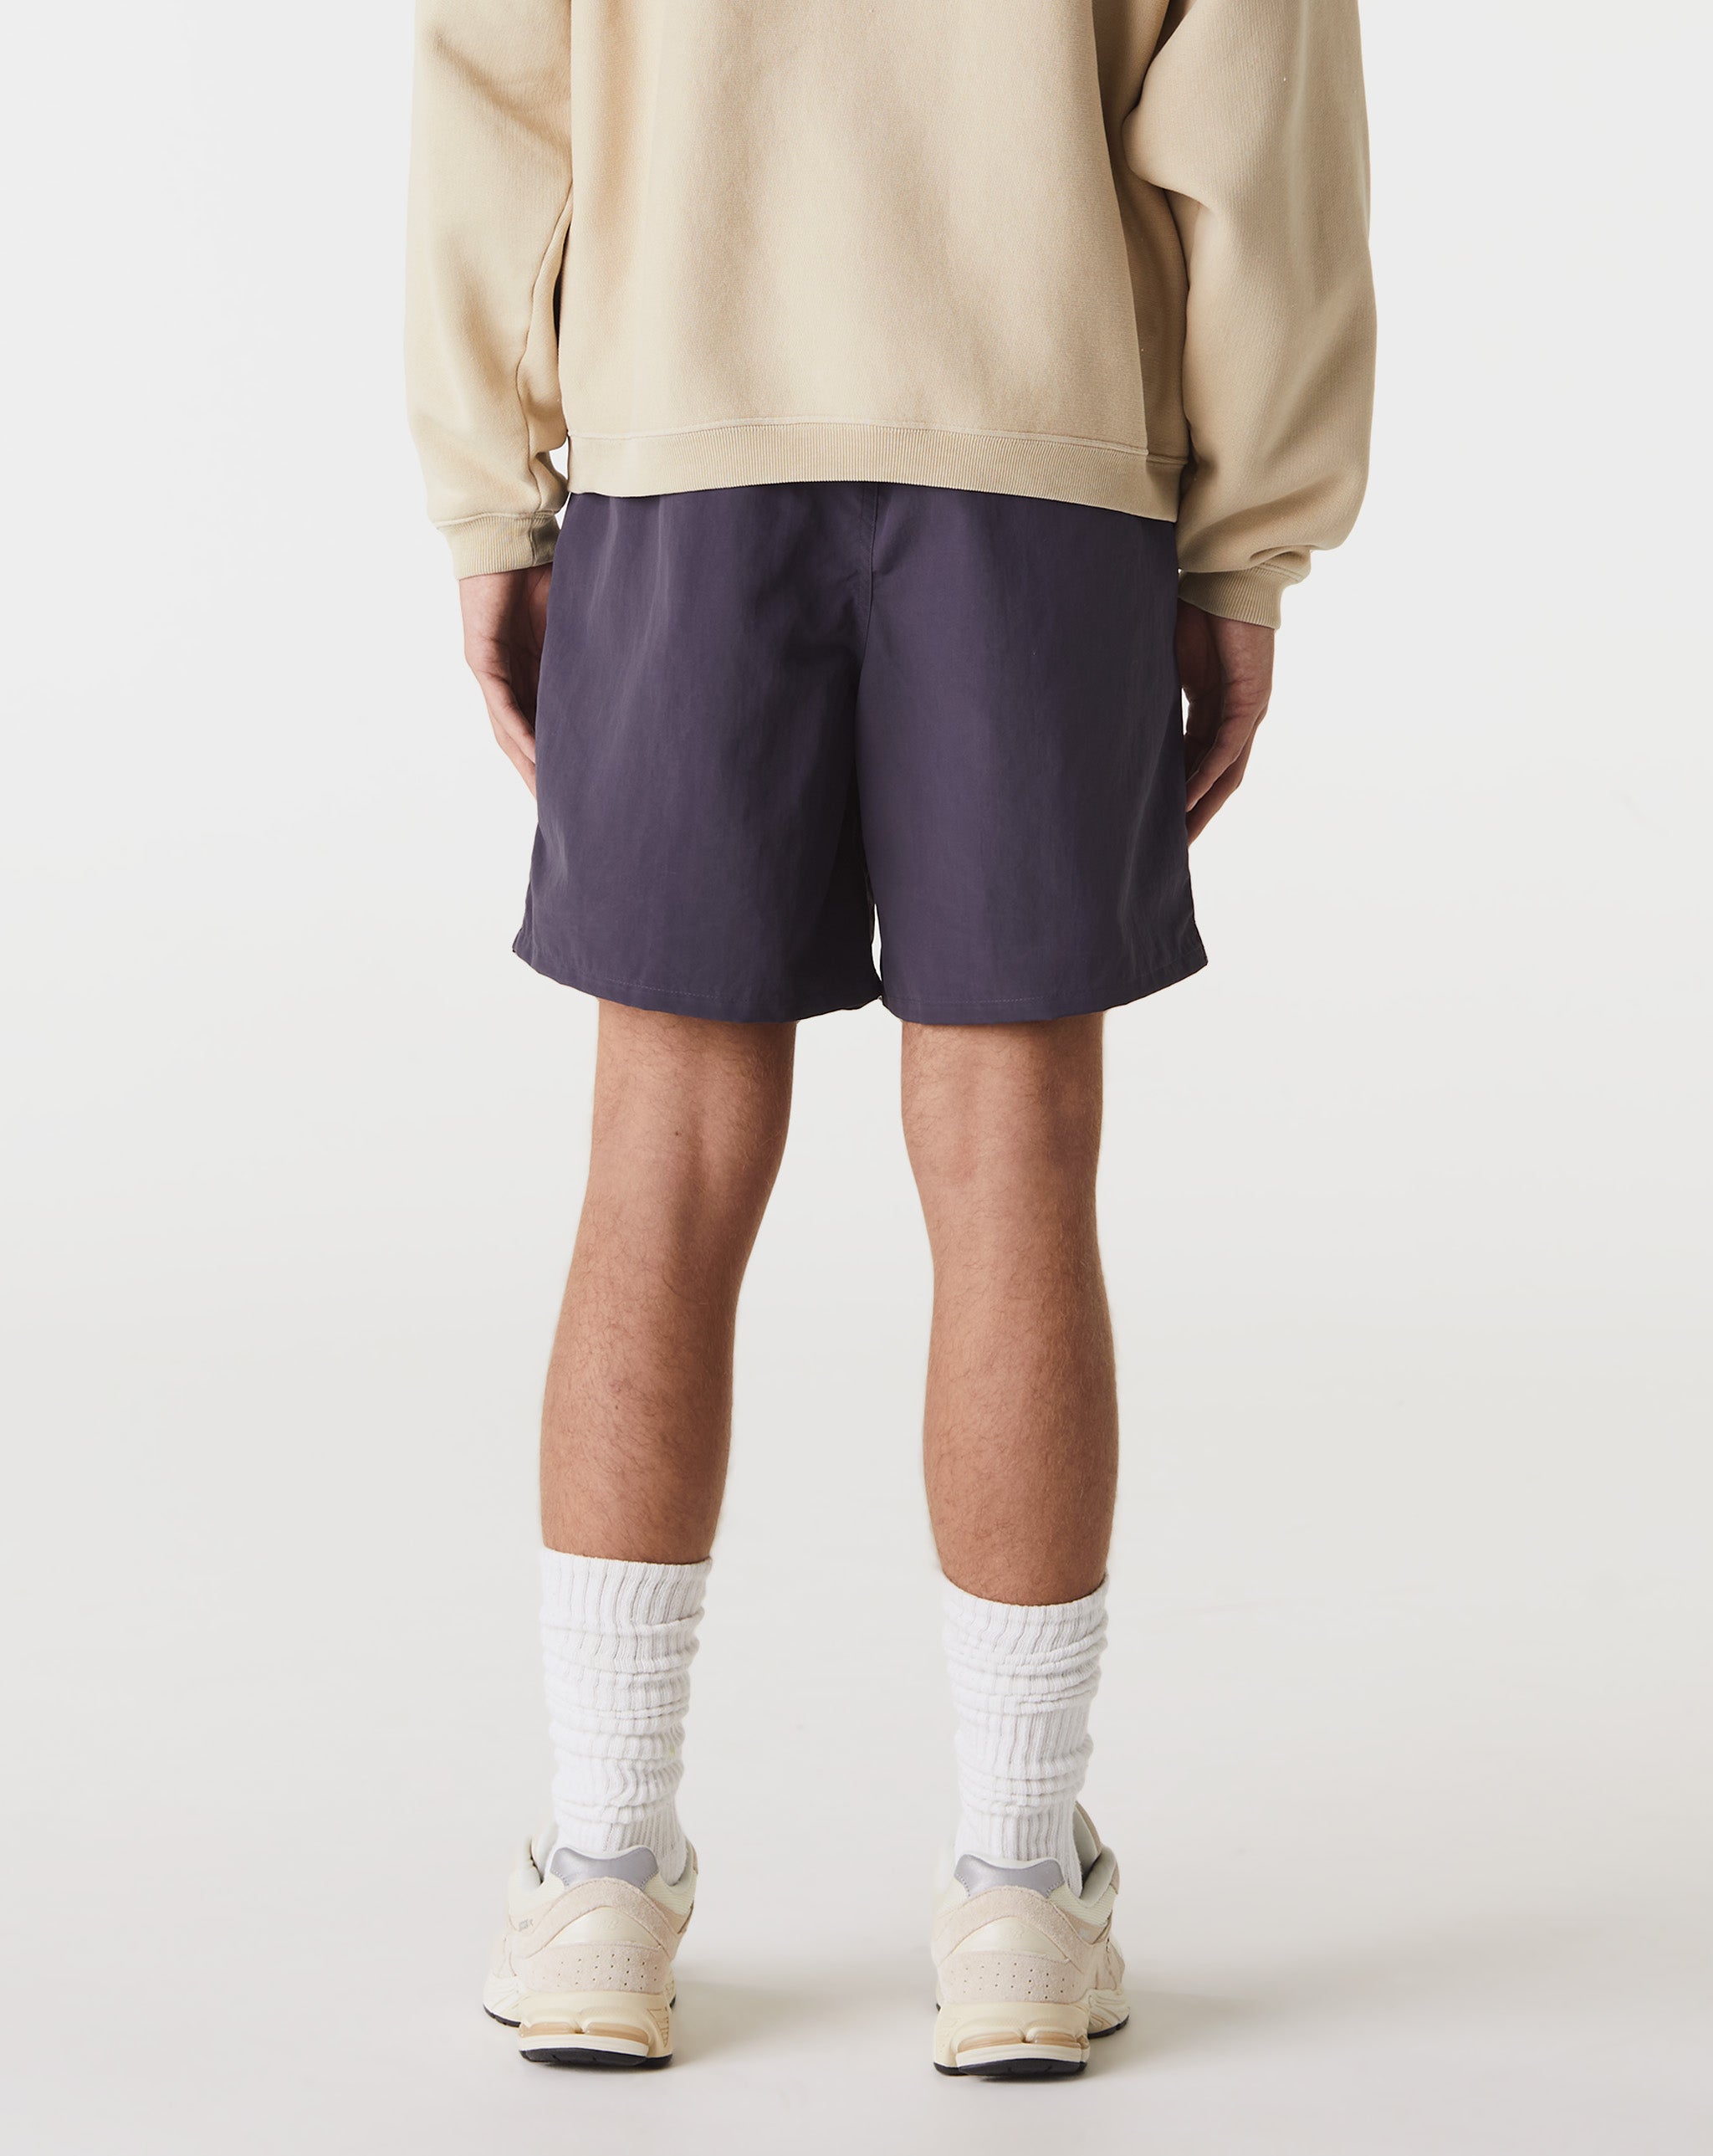 Stüssy Lounge in luxury in these blue sweat Classic shorts from  - Cheap Cerbe Jordan outlet